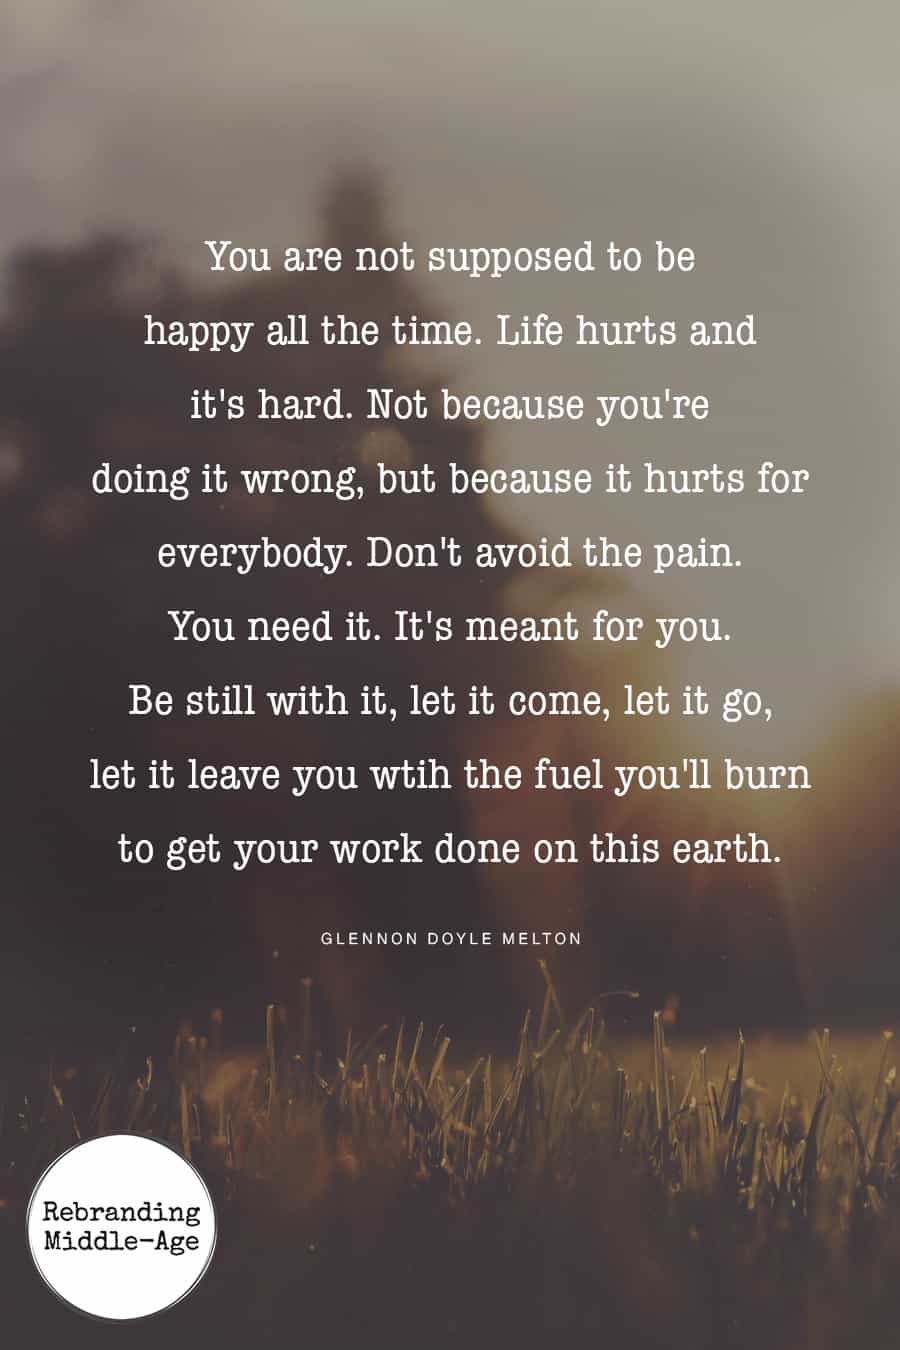 Sometimes life hurts and it's hard. Not because you're not right but because it hurts for everybody. #quote *Love this quote and this entire post